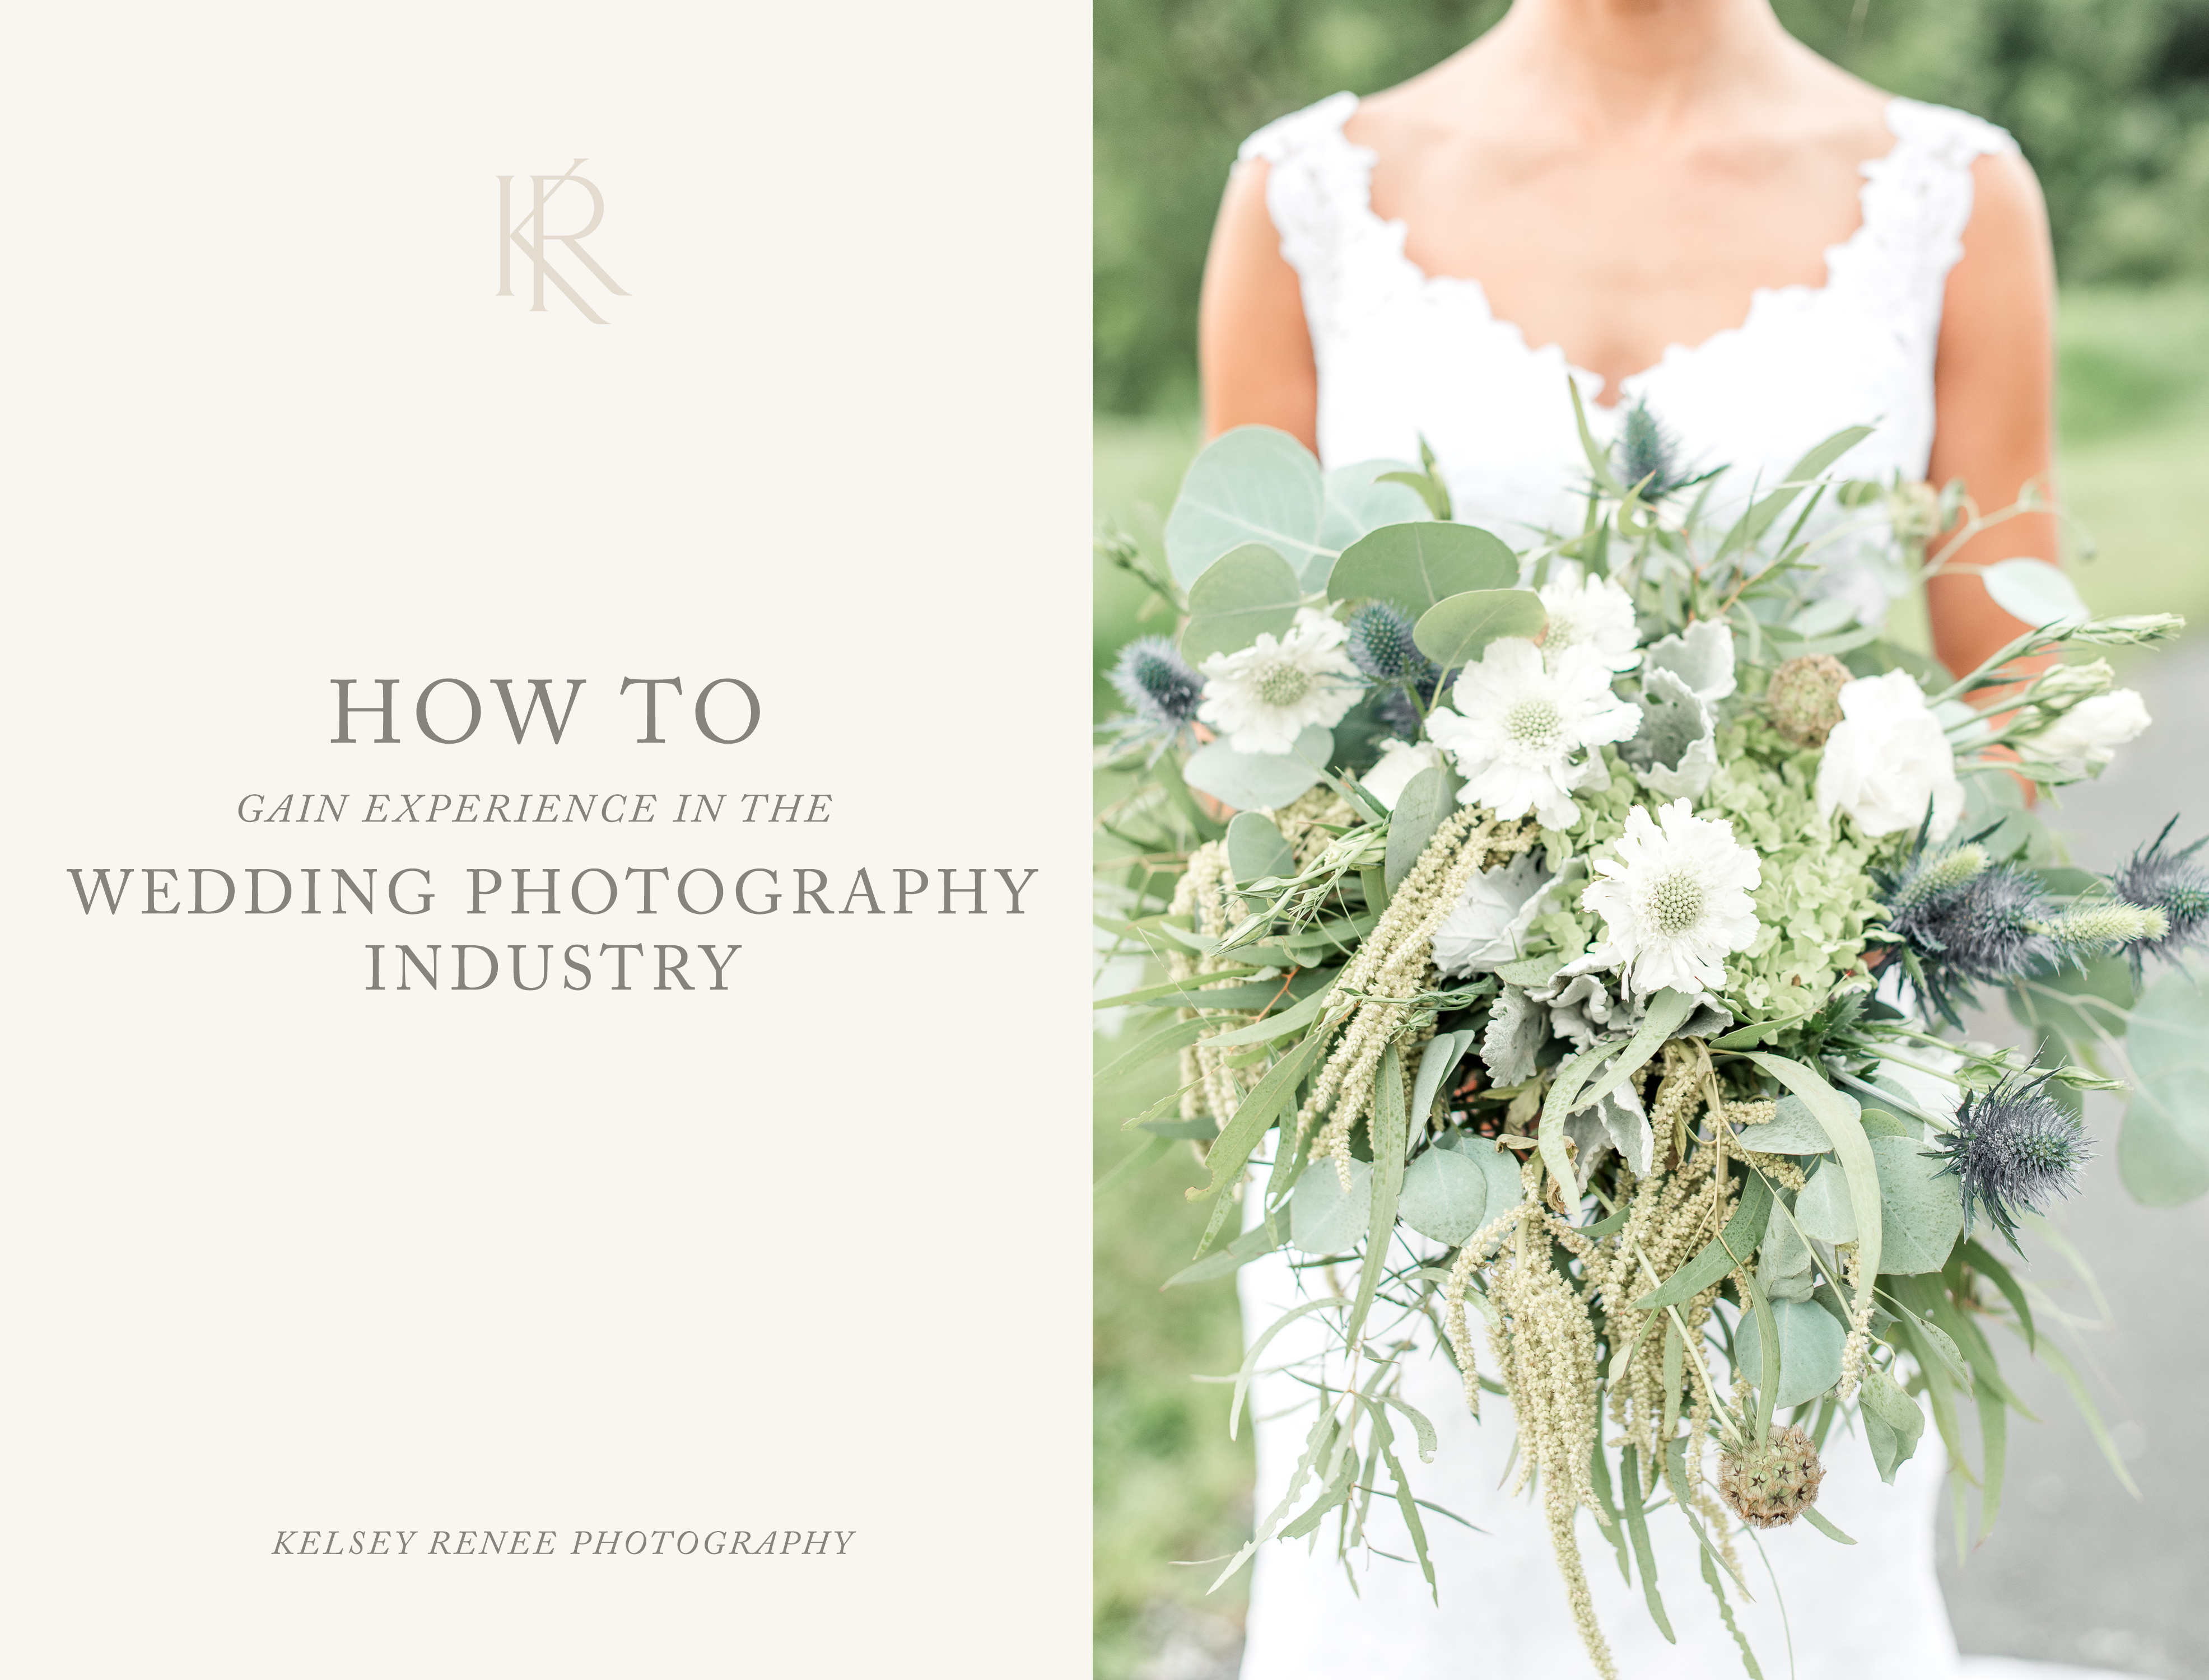 How To Gain Experience In The Wedding Photography Industry by Kelsey Renee Photography